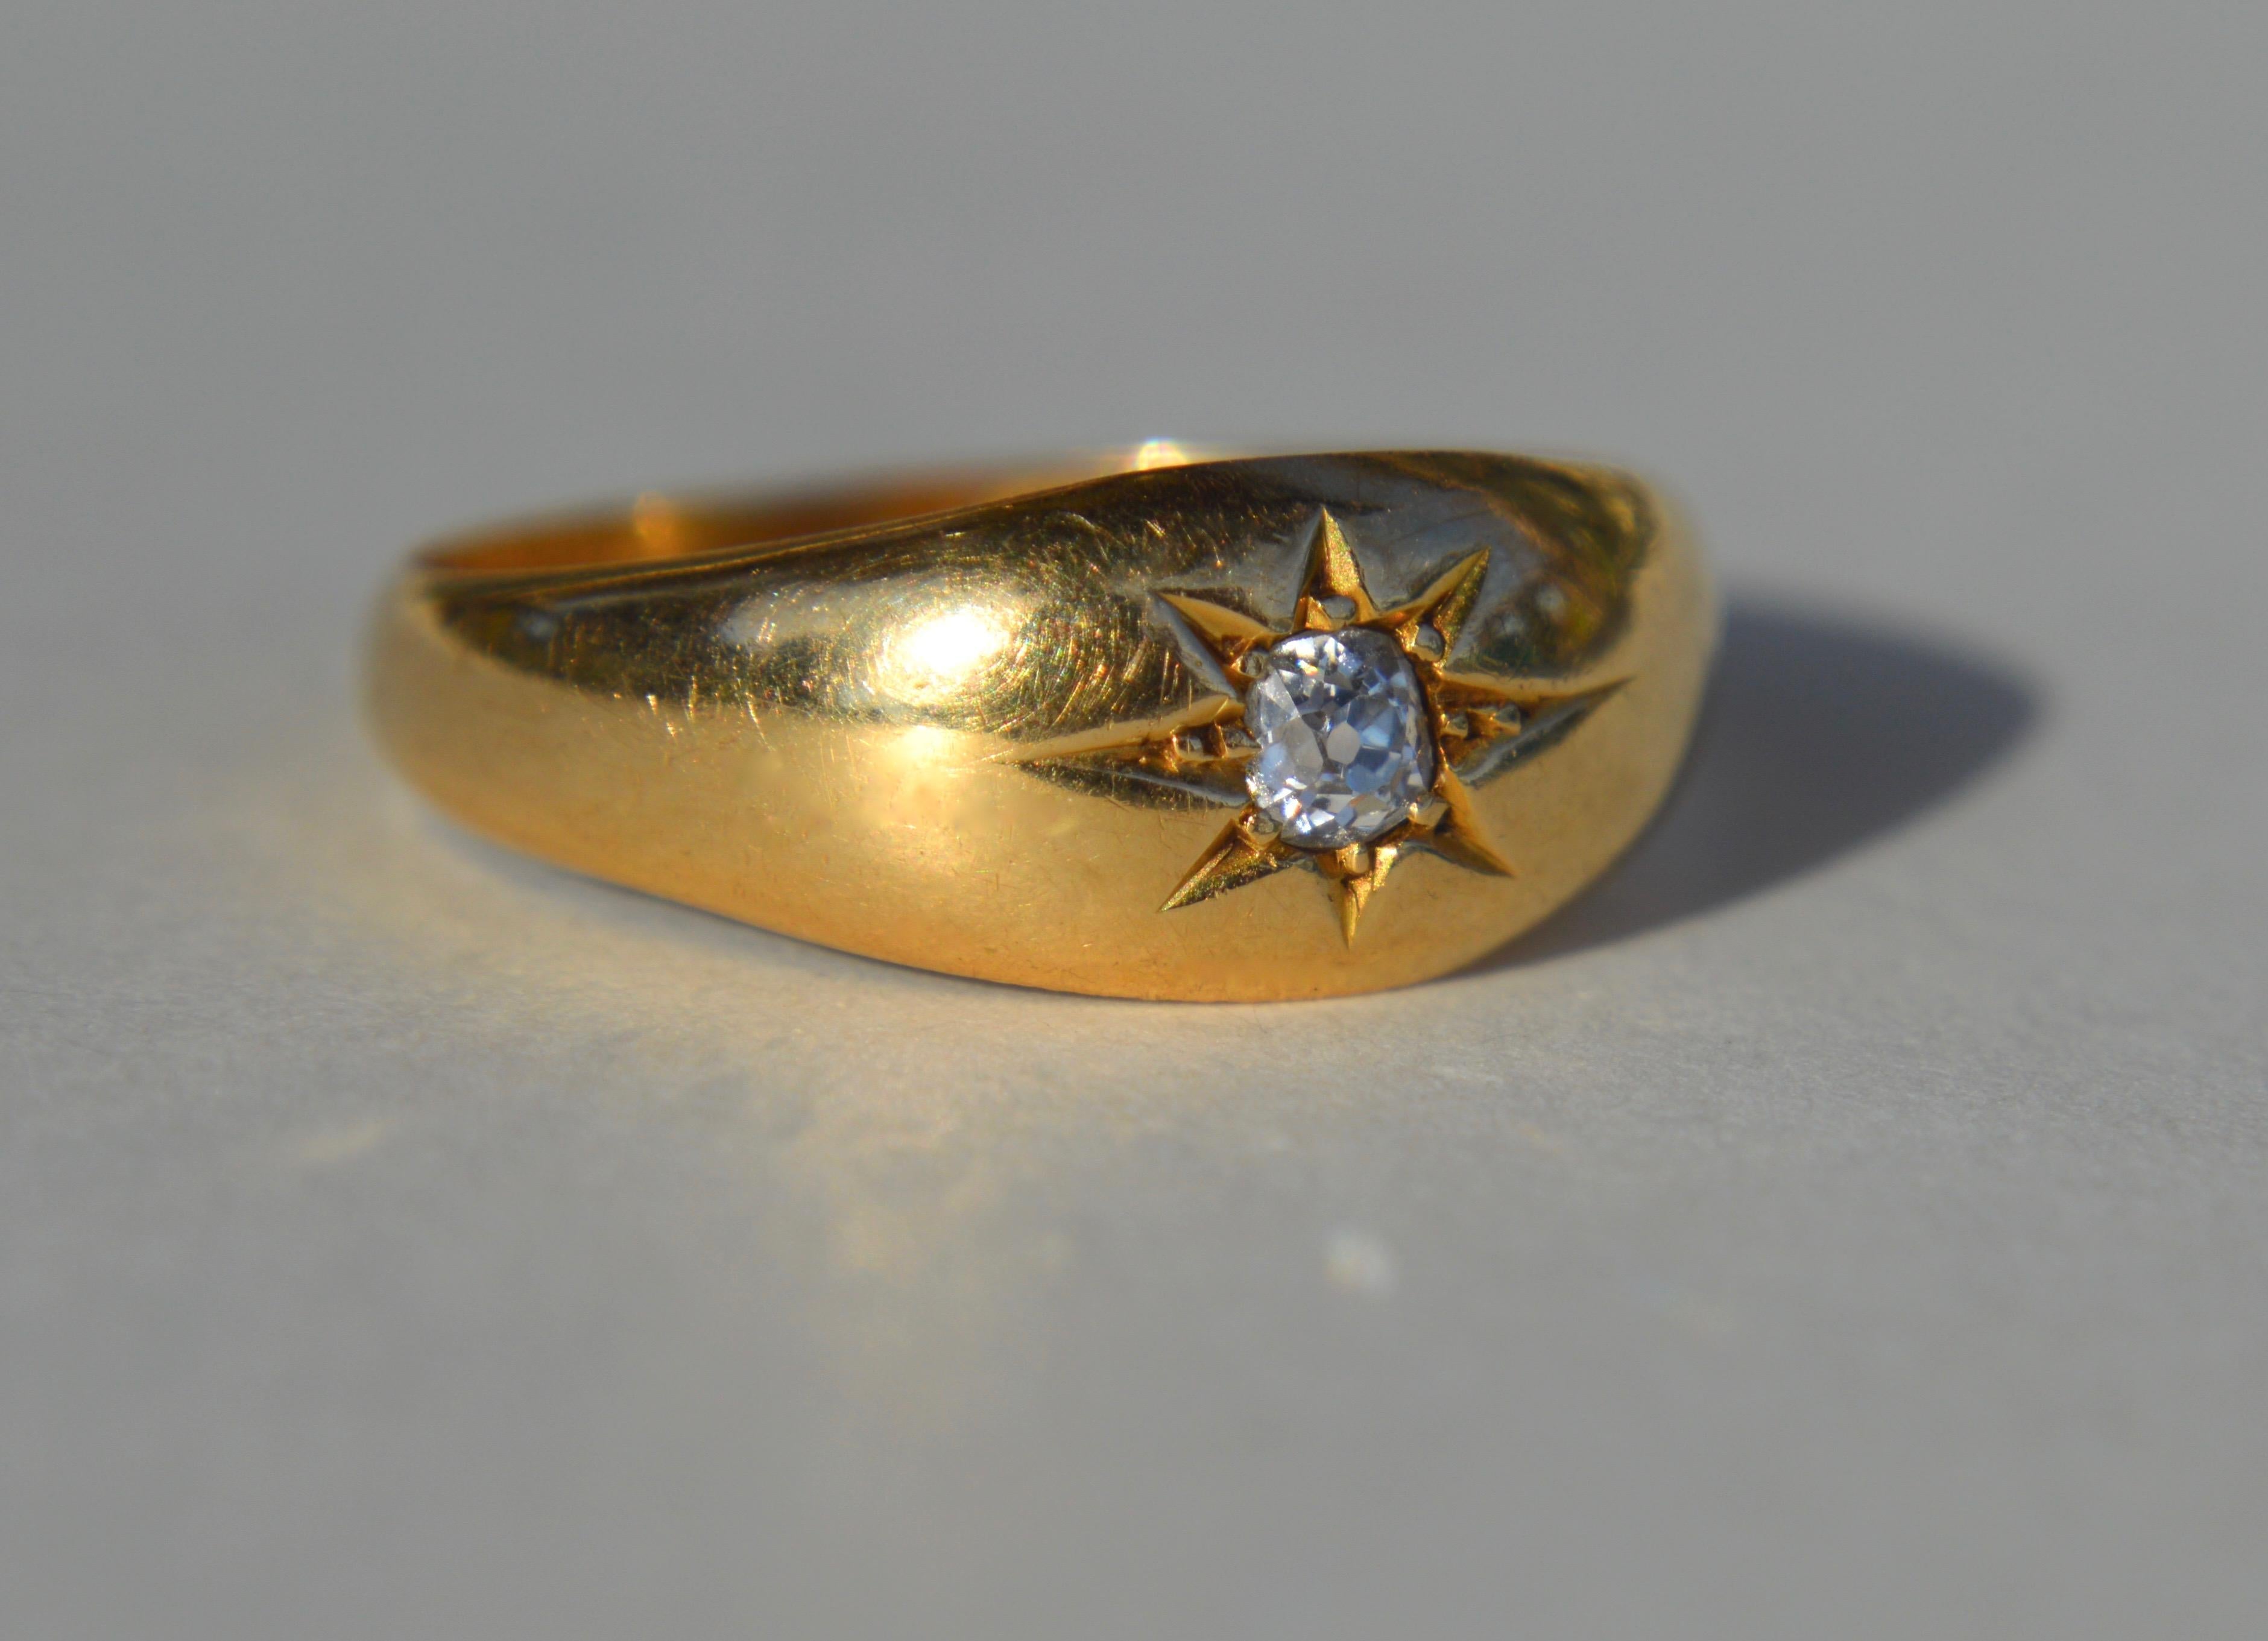 Antique Victorian era late 1800s .25 carat old minecut diamond 18K yellow gold ring. English hallmarks from Birmingham, maker's mark H&S, stamped as 18K. Size 6.75, can be resized by a jeweler. Diamond clarity has been graded as color G, clarity